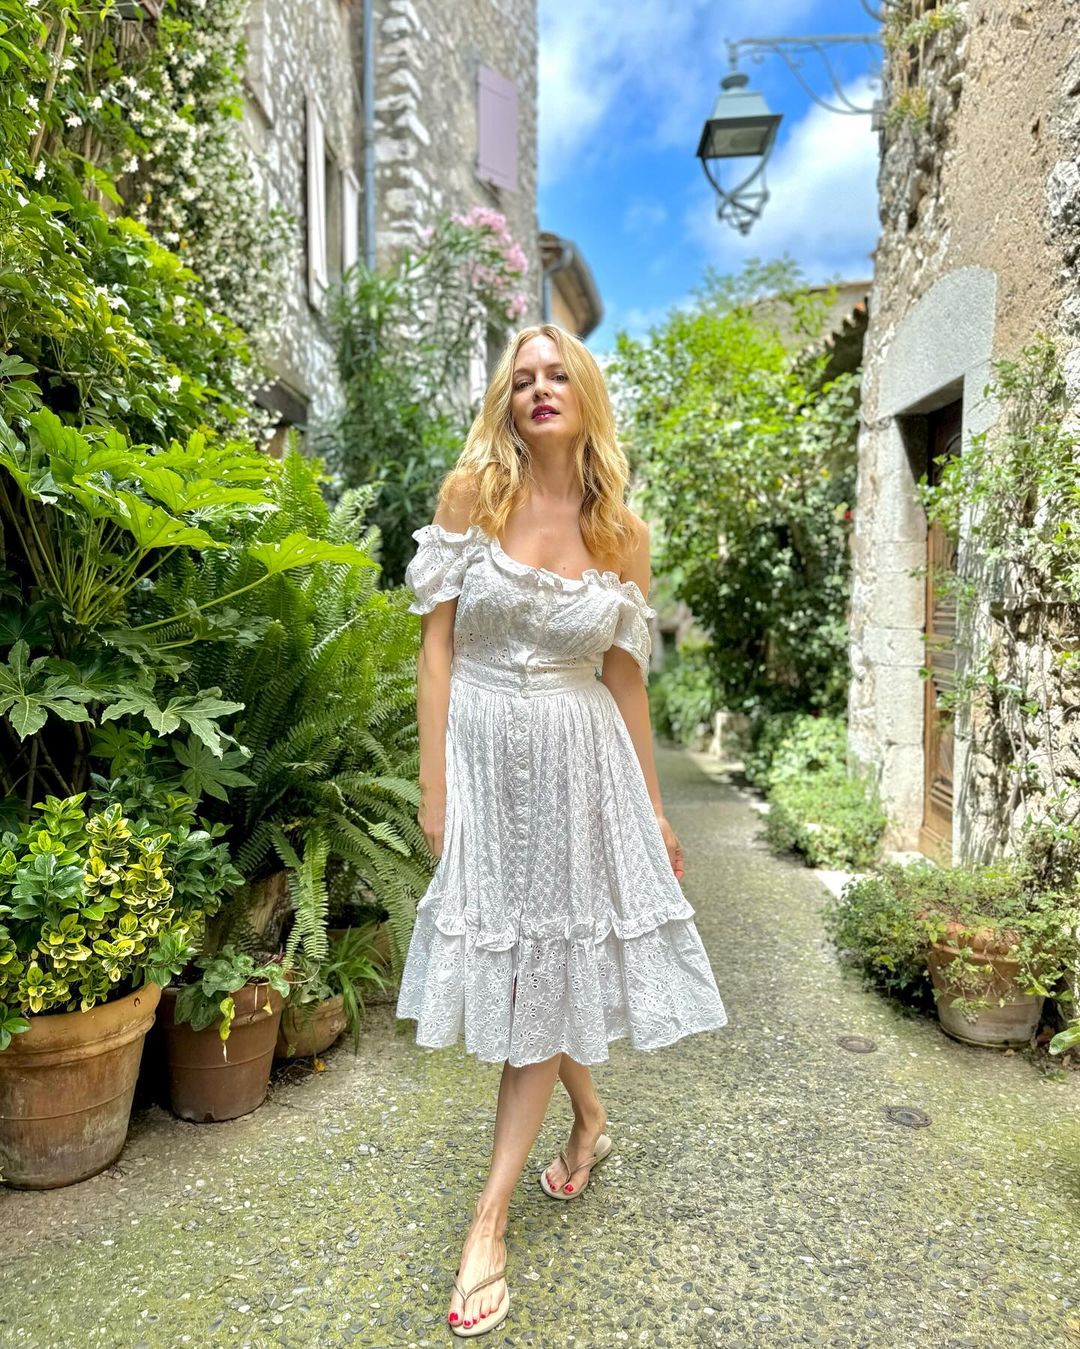 Heather Graham standing on a gorgeous path wearing a white dress and thong sandals